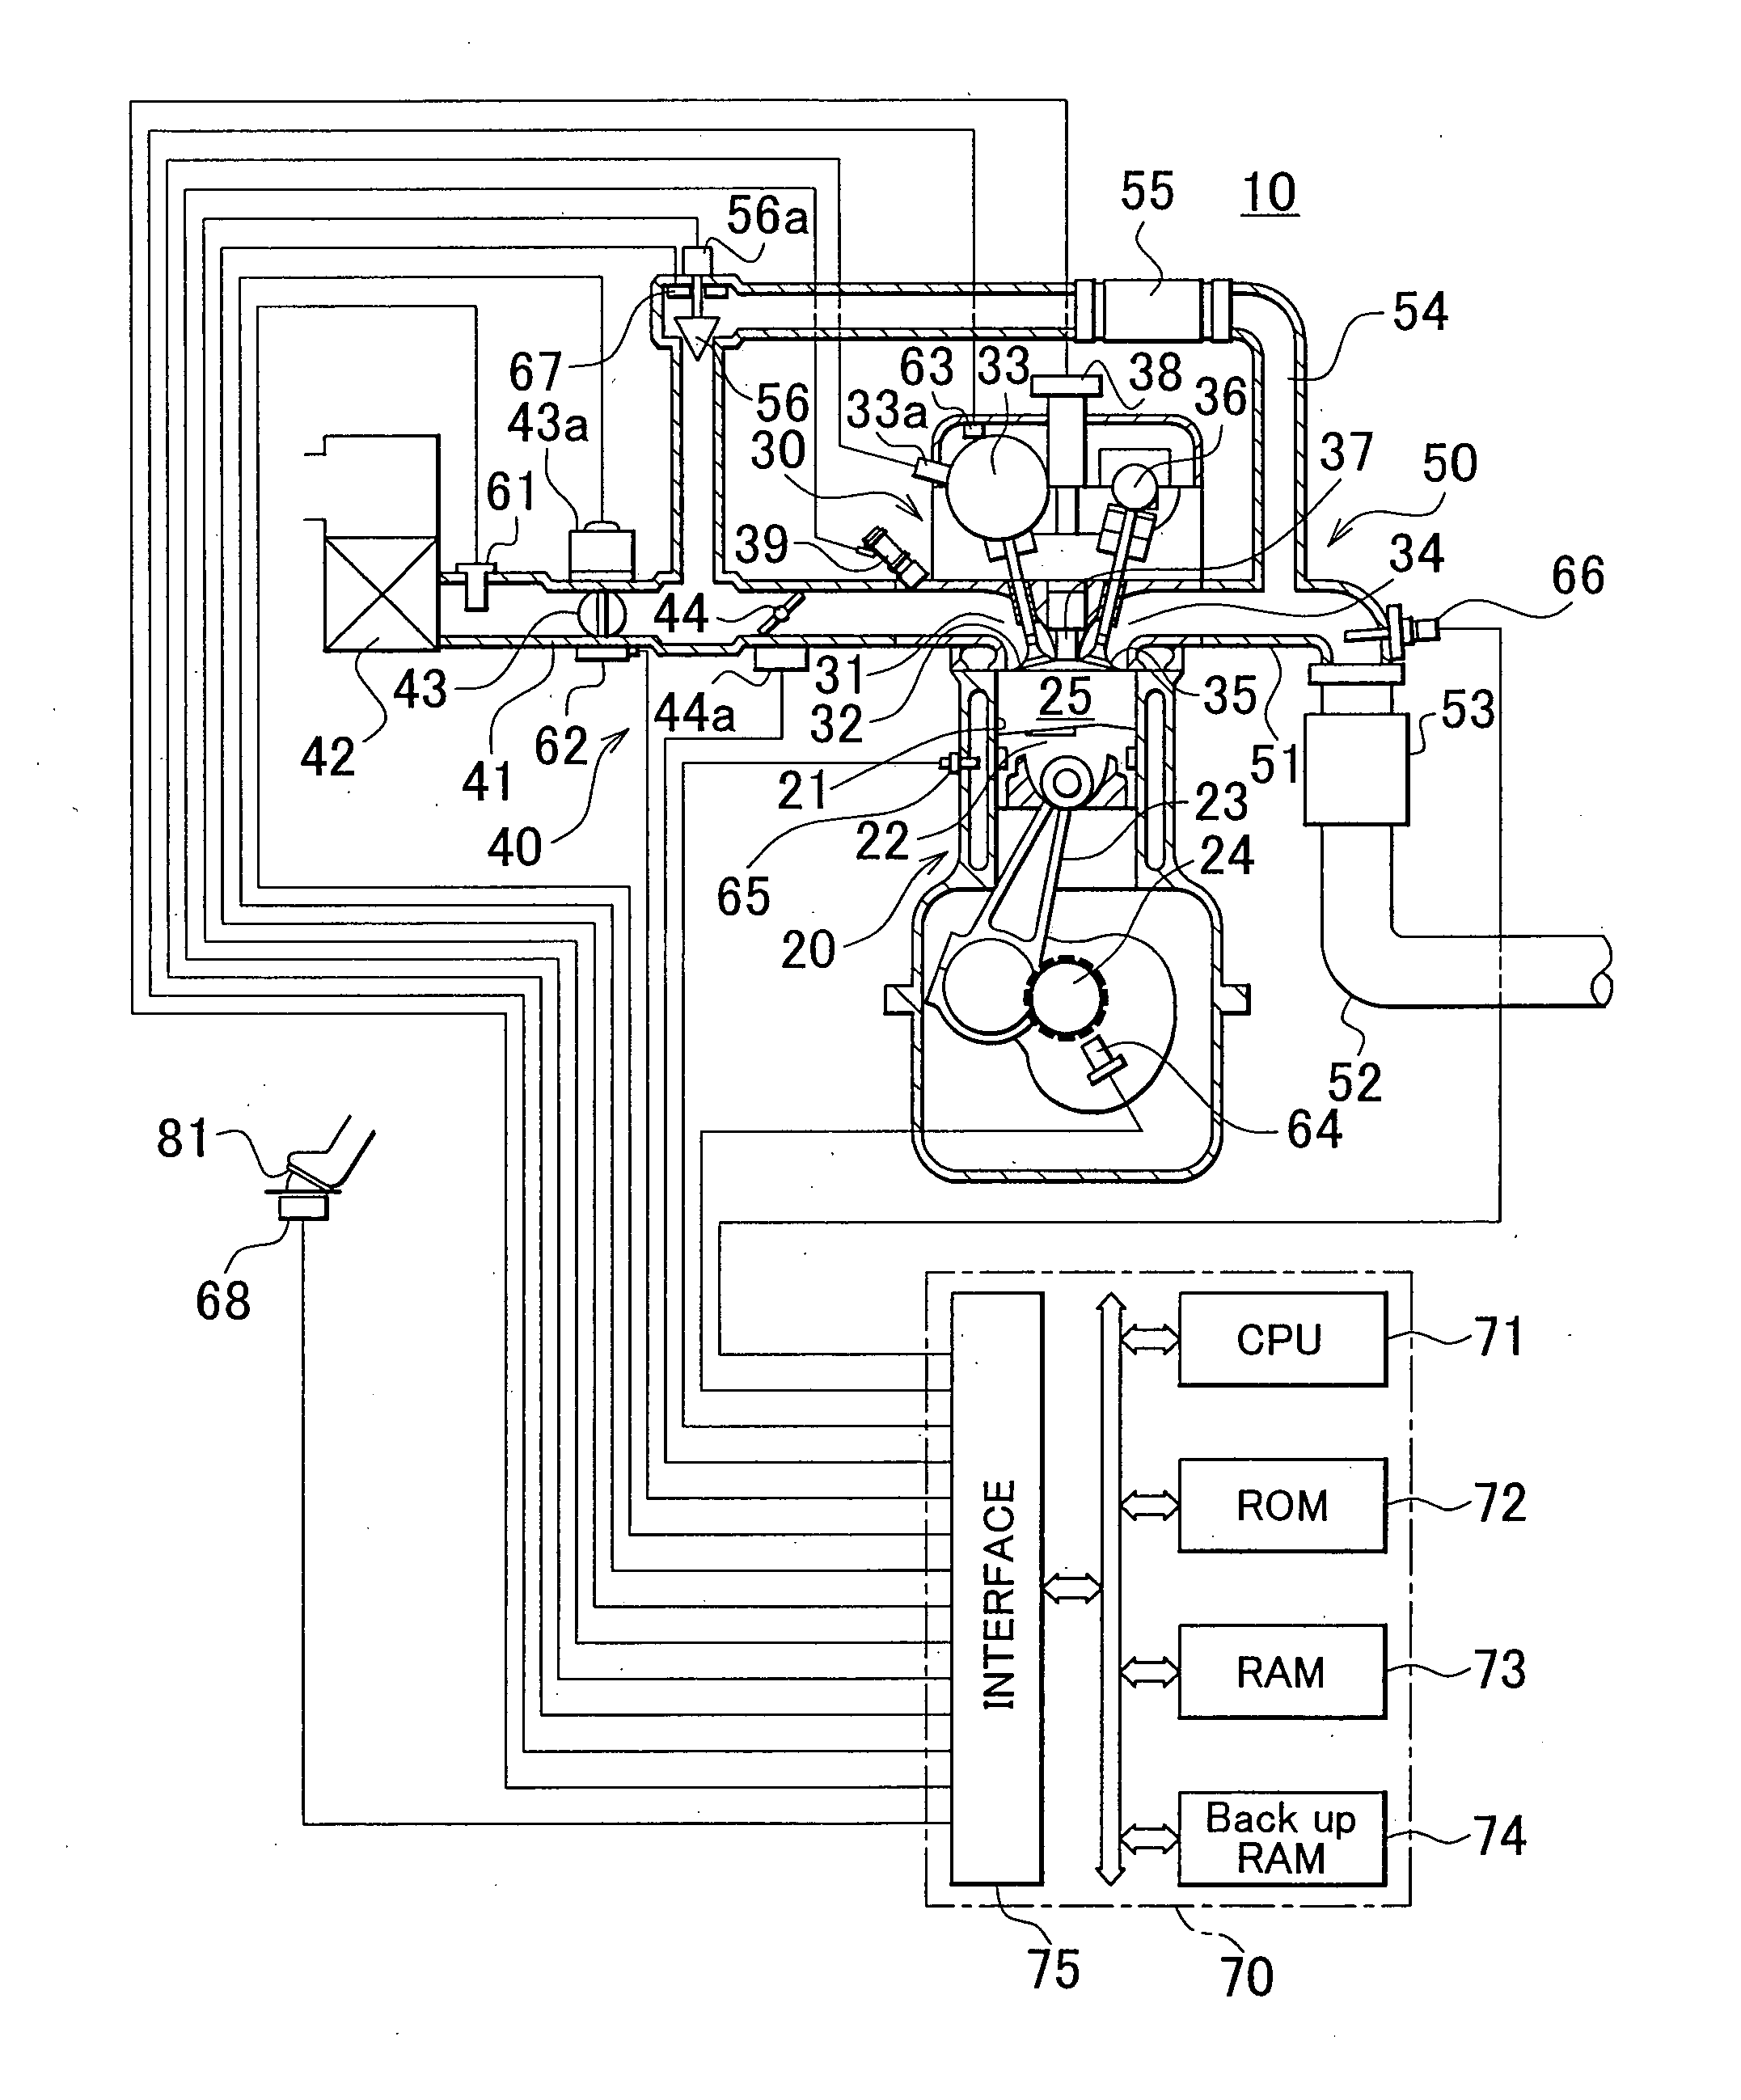 Ignition timing control apparatus and method for internal combustion engine